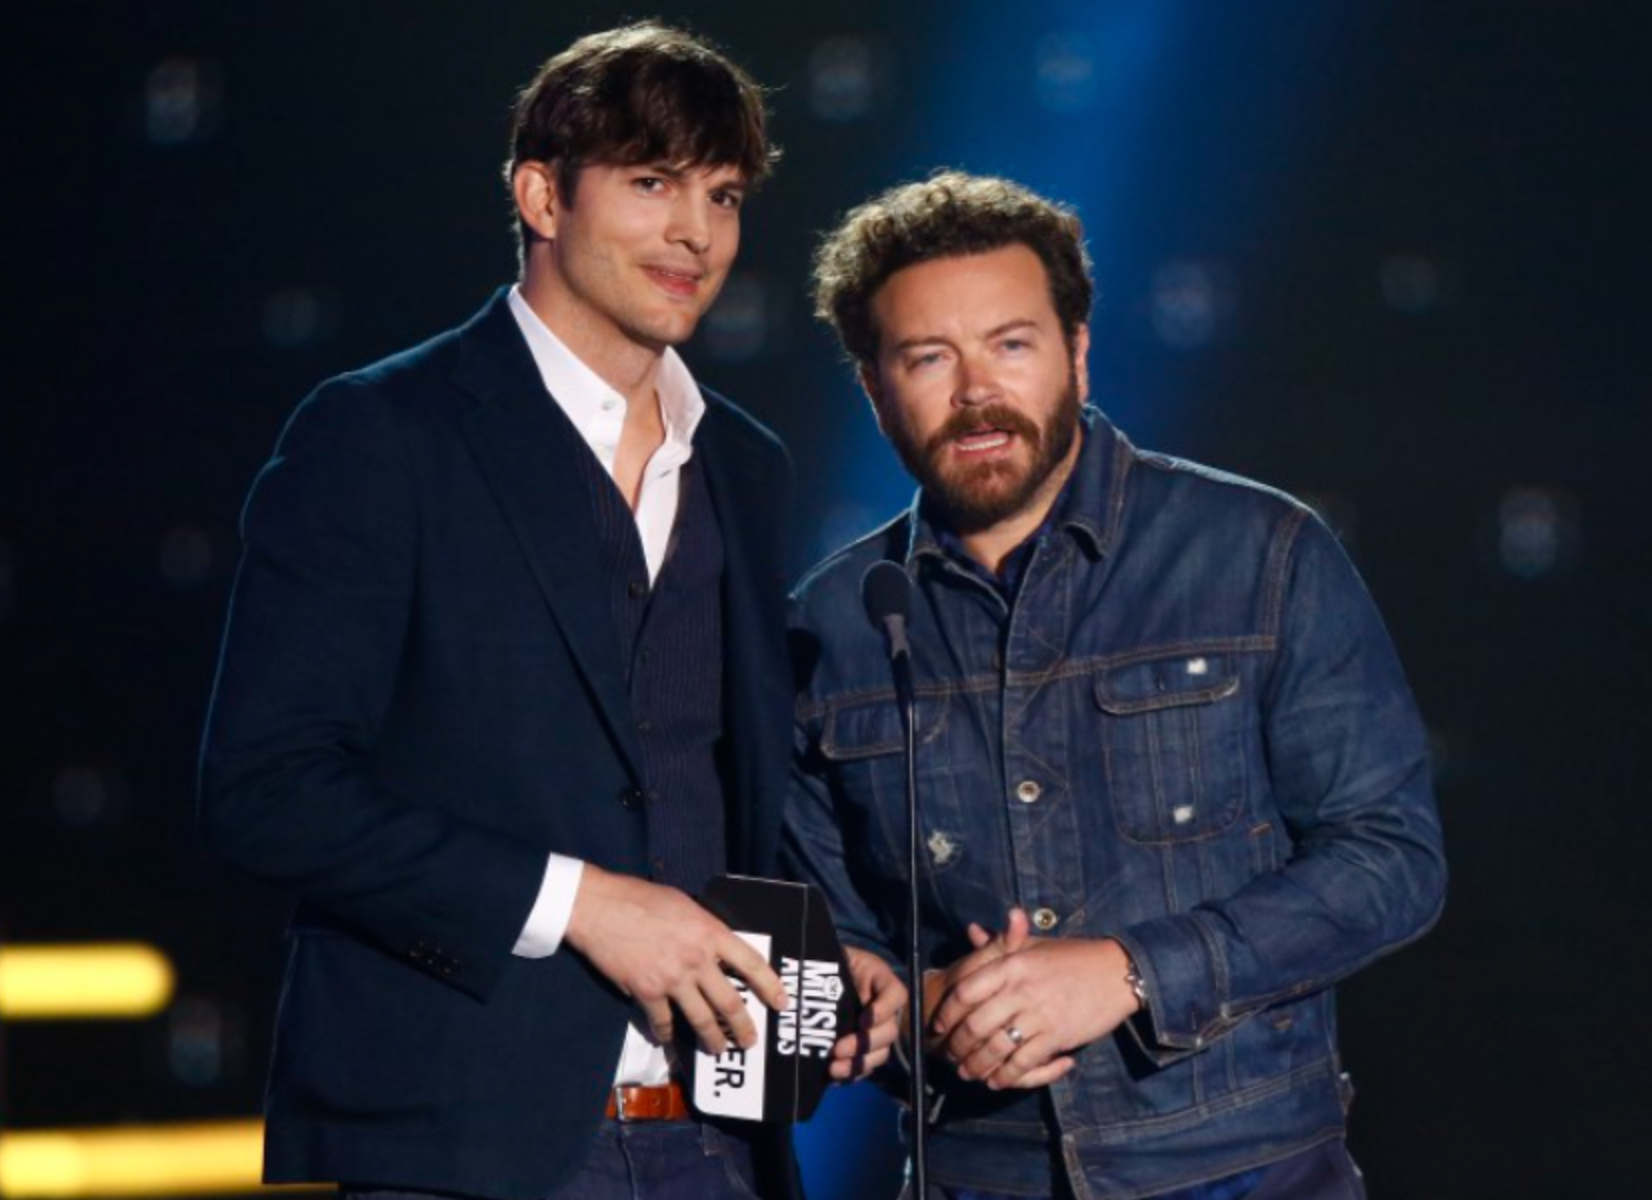 Ashton Kutcher, left, and Danny Masterson present the award for collaborative video of the year at the CMT Music Awards at Music City Center on June 7, 2017